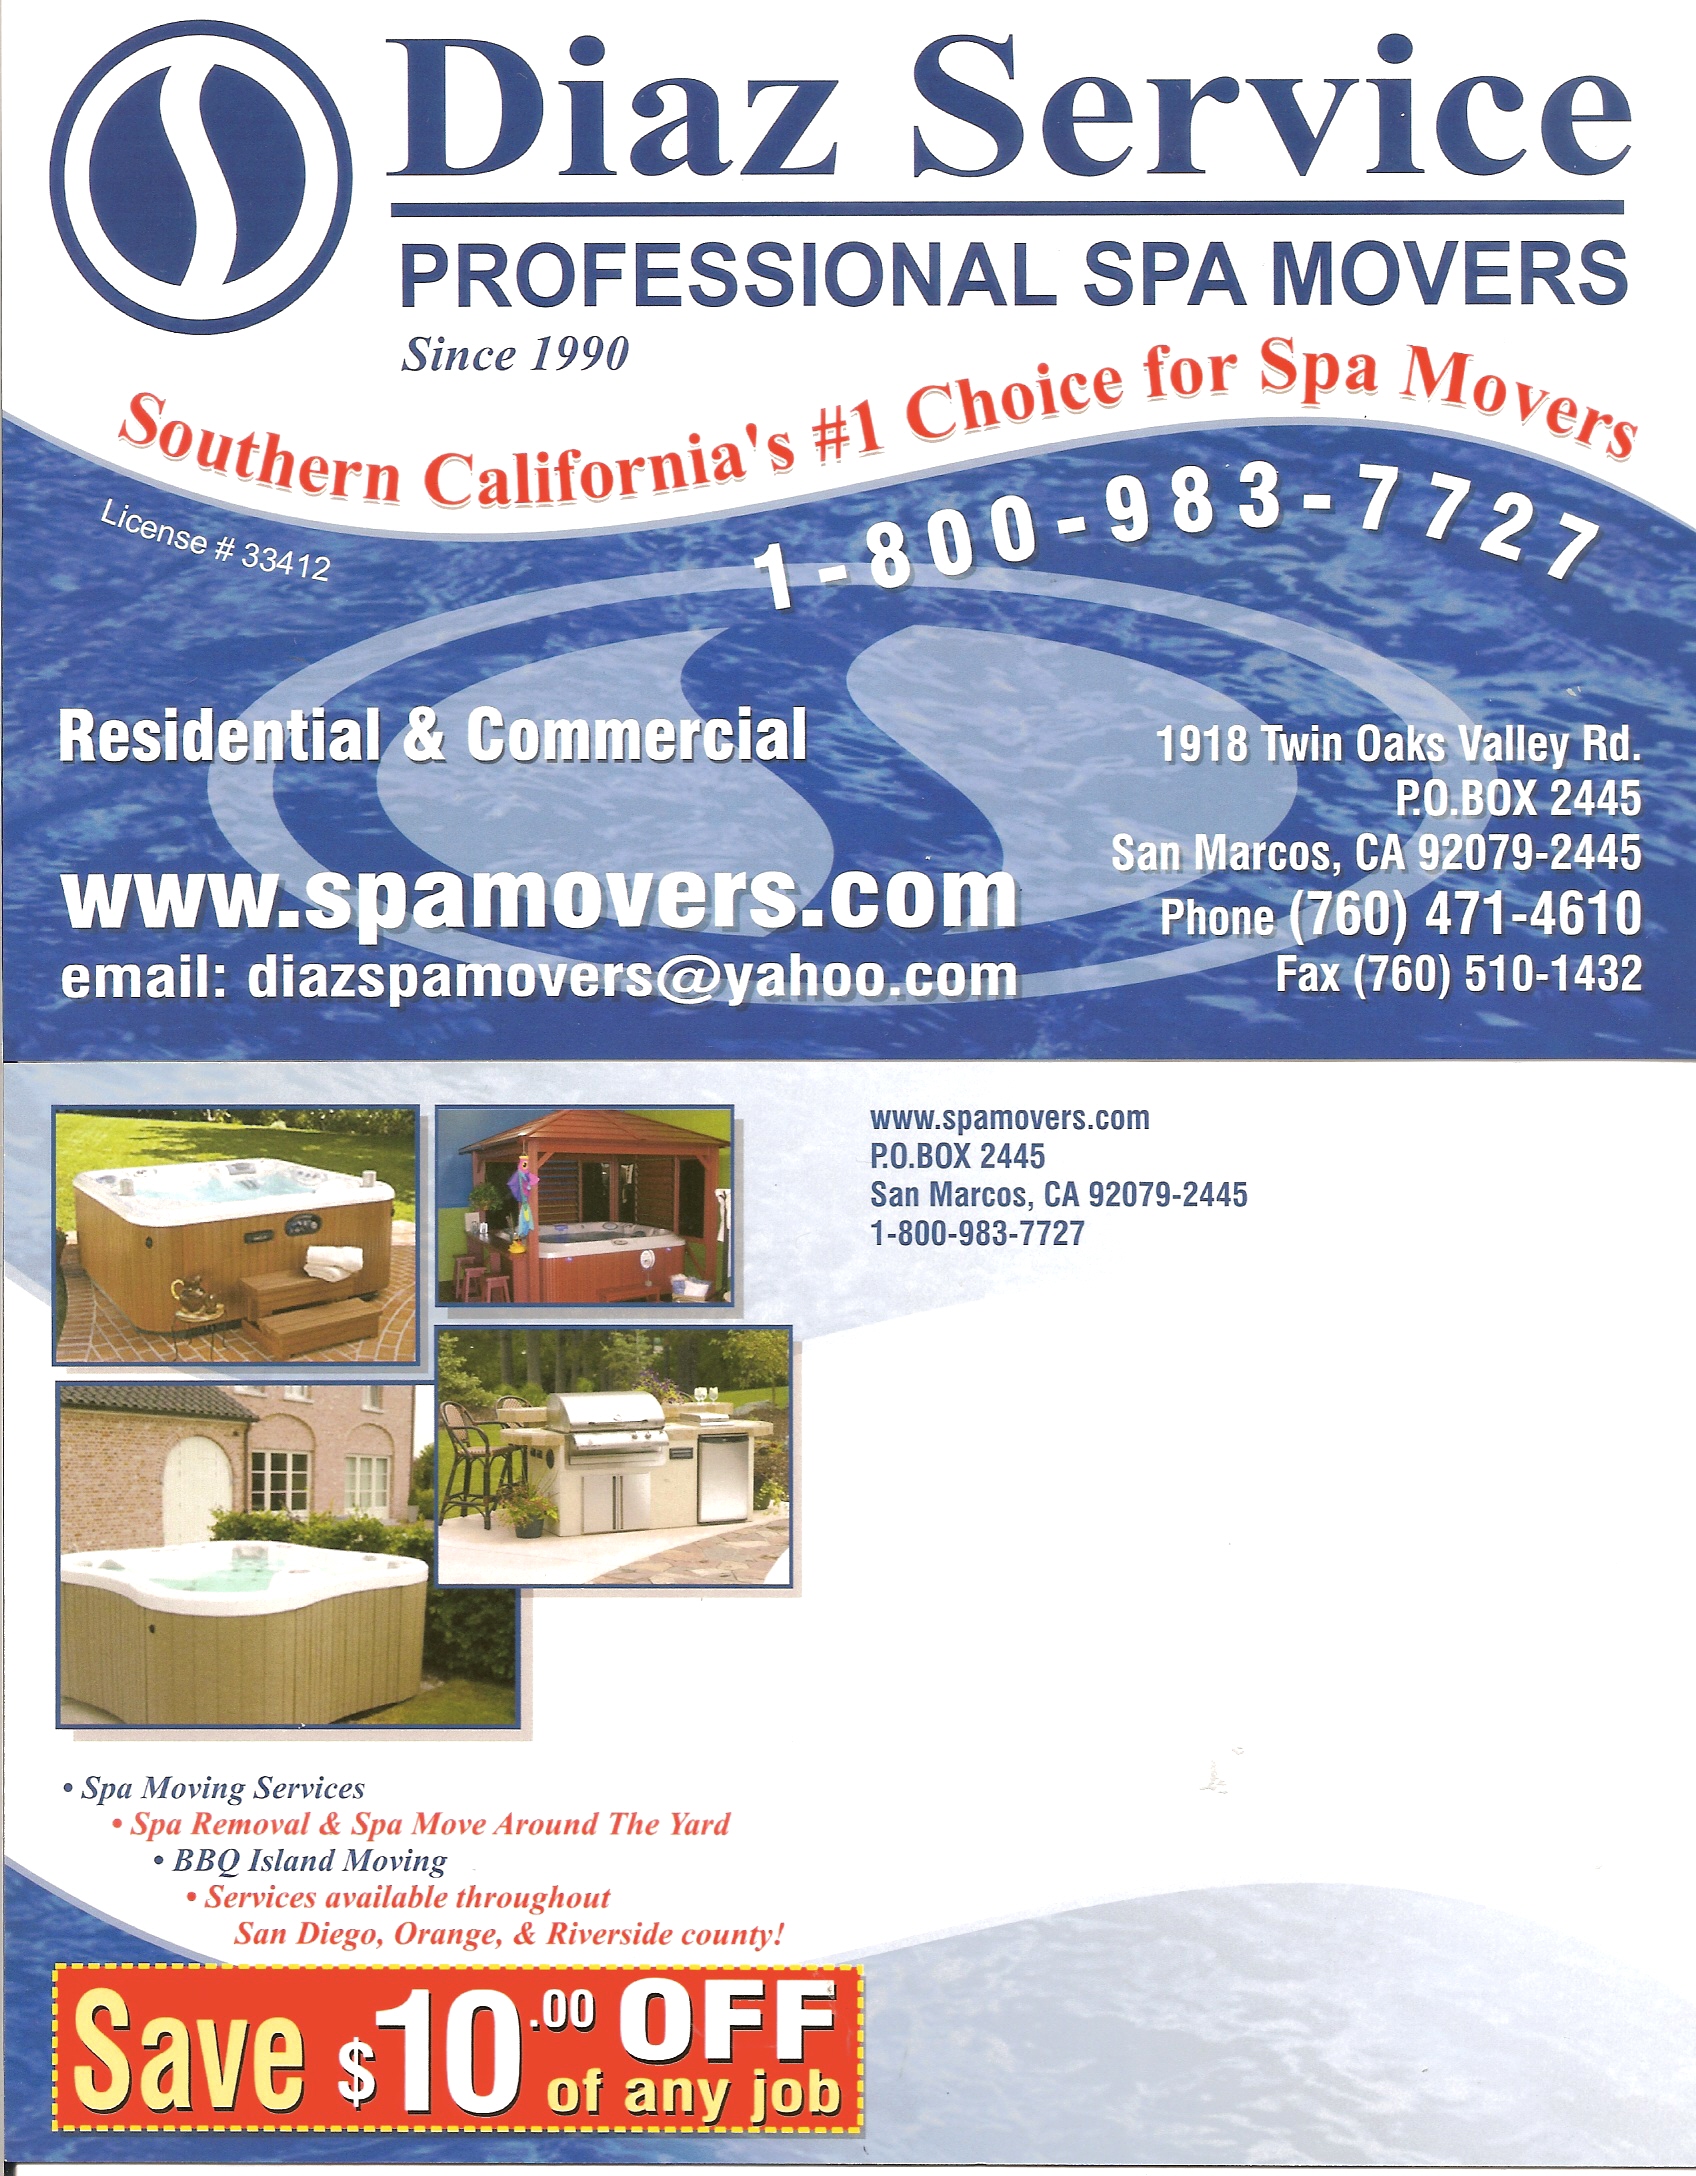 Diaz Spa Movers Coupon